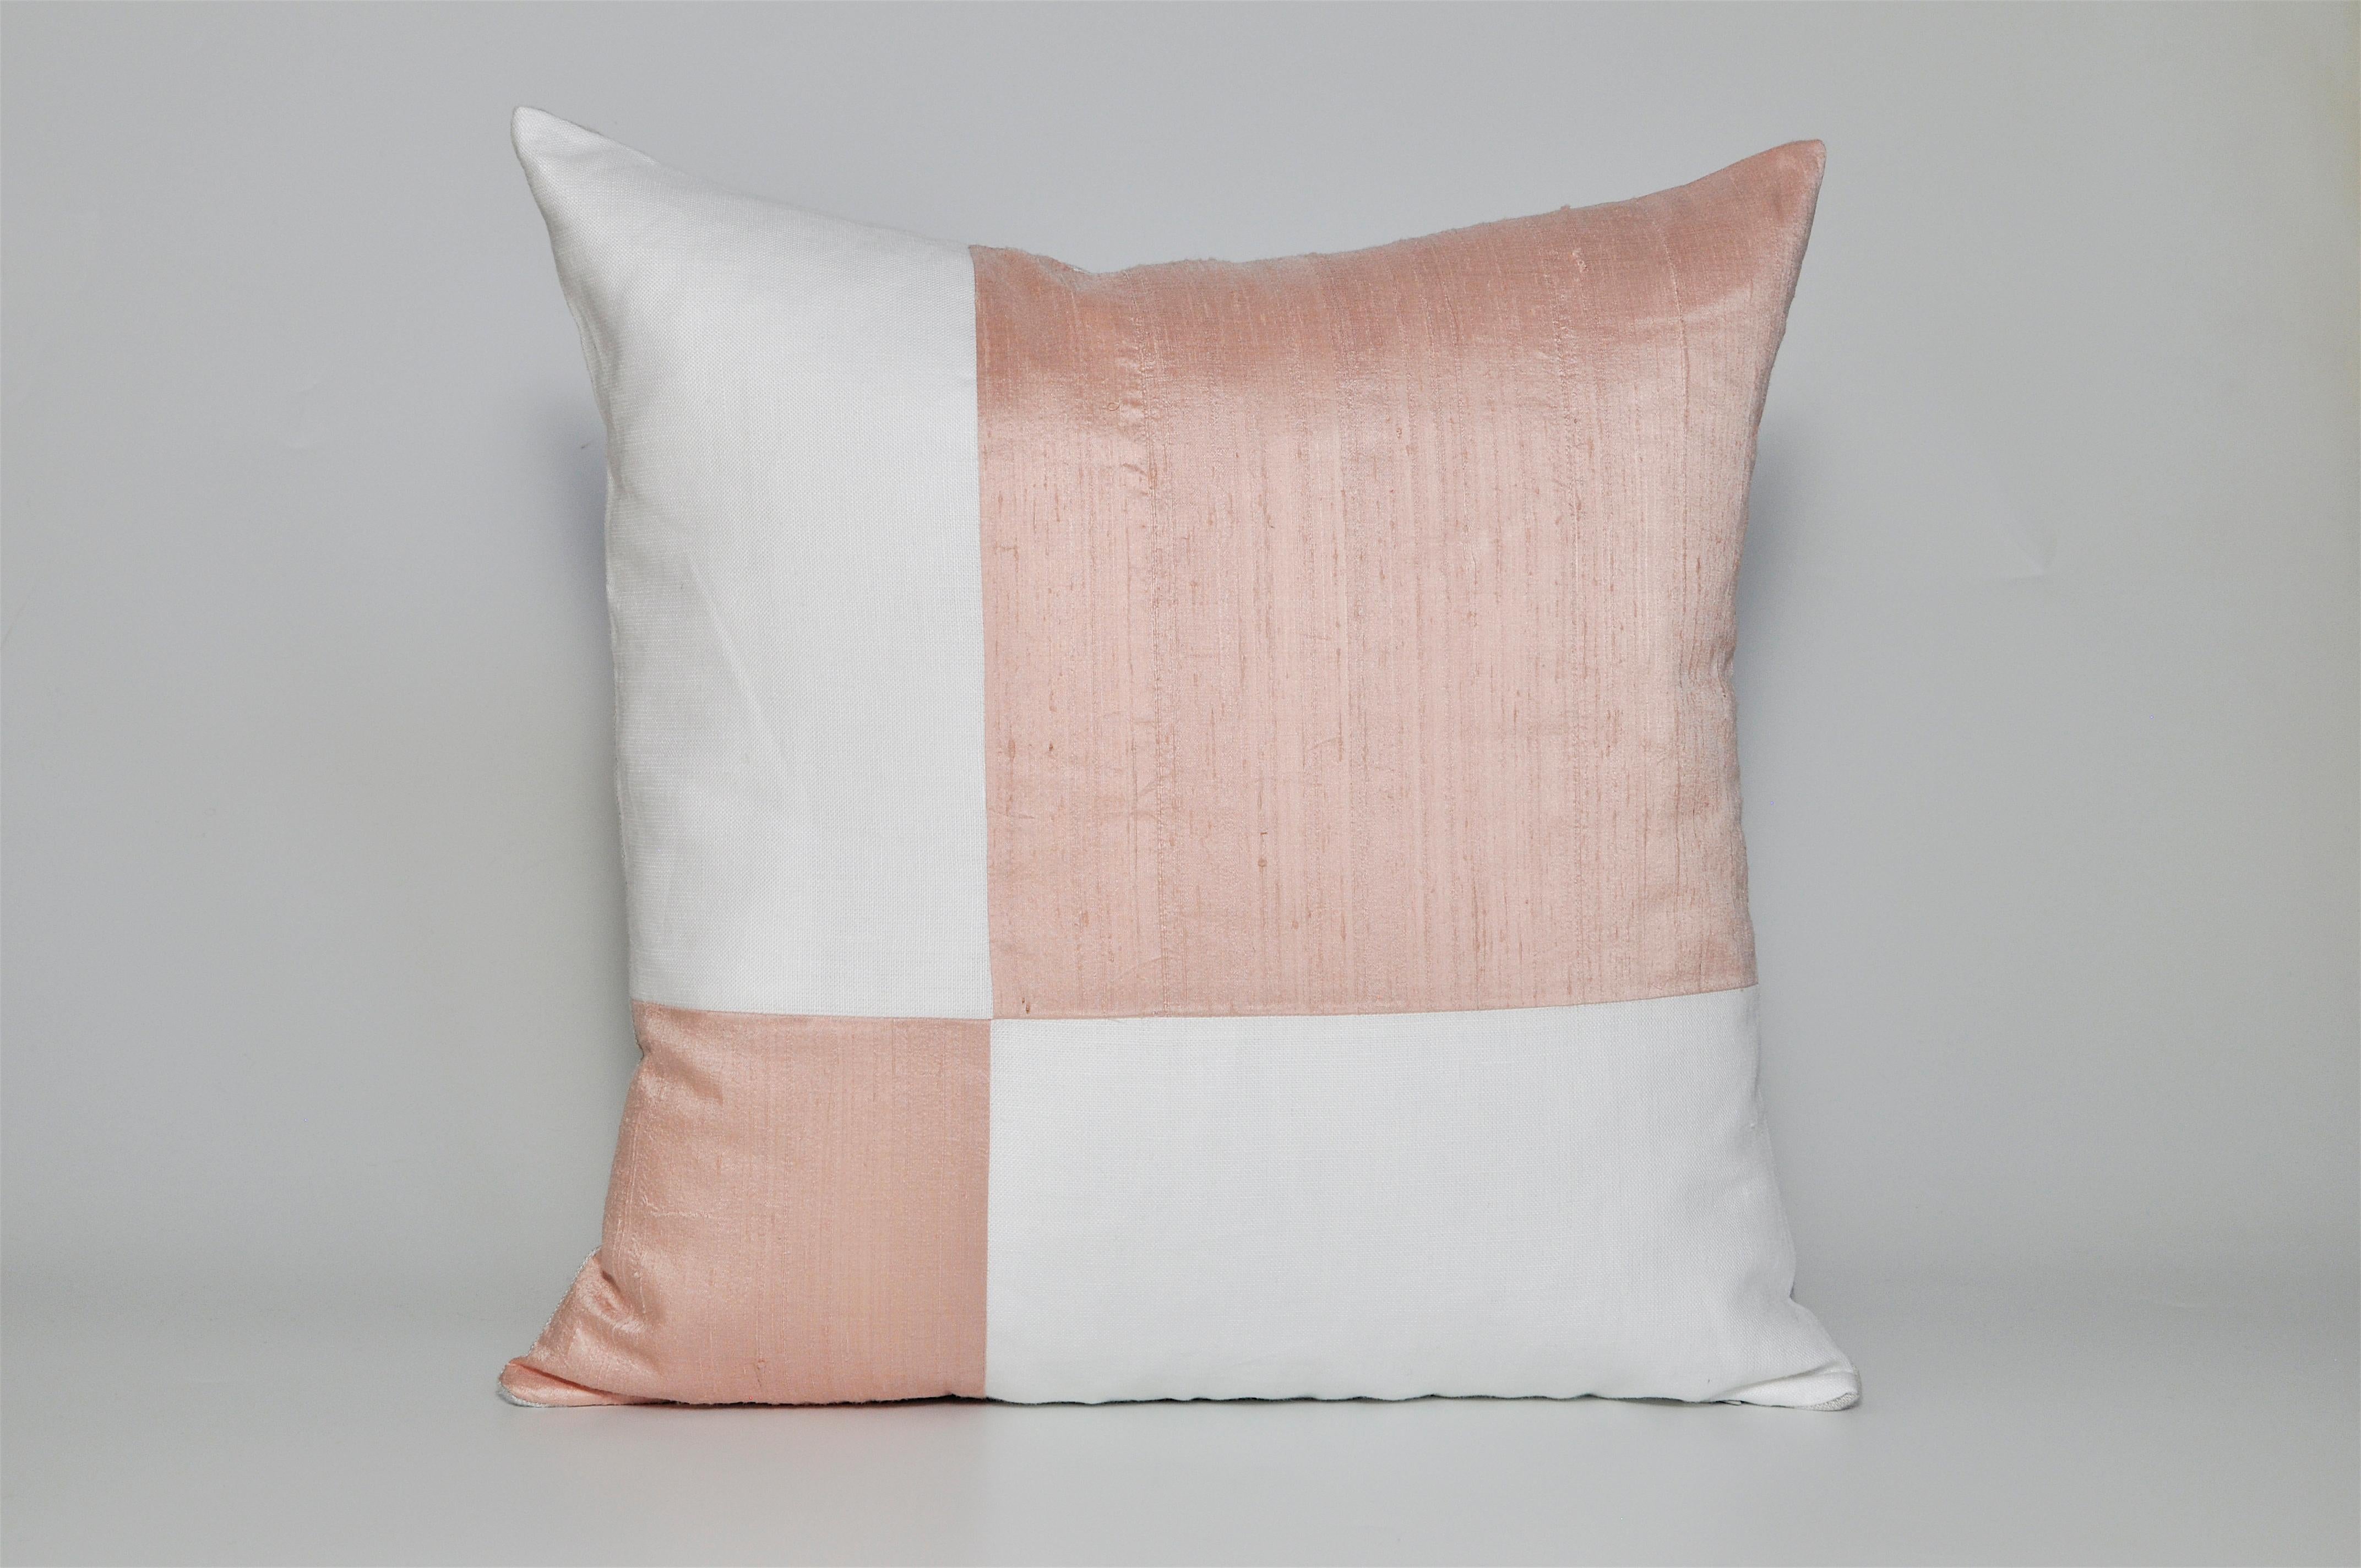 Large, pink peach and white Irish linen patchwork cushion geometric pillow

A custom made contemporary luxury cushion (pillow) constructed with vintage elements by using fragments of precious fabric. In a soft peachy nude light pink matched with